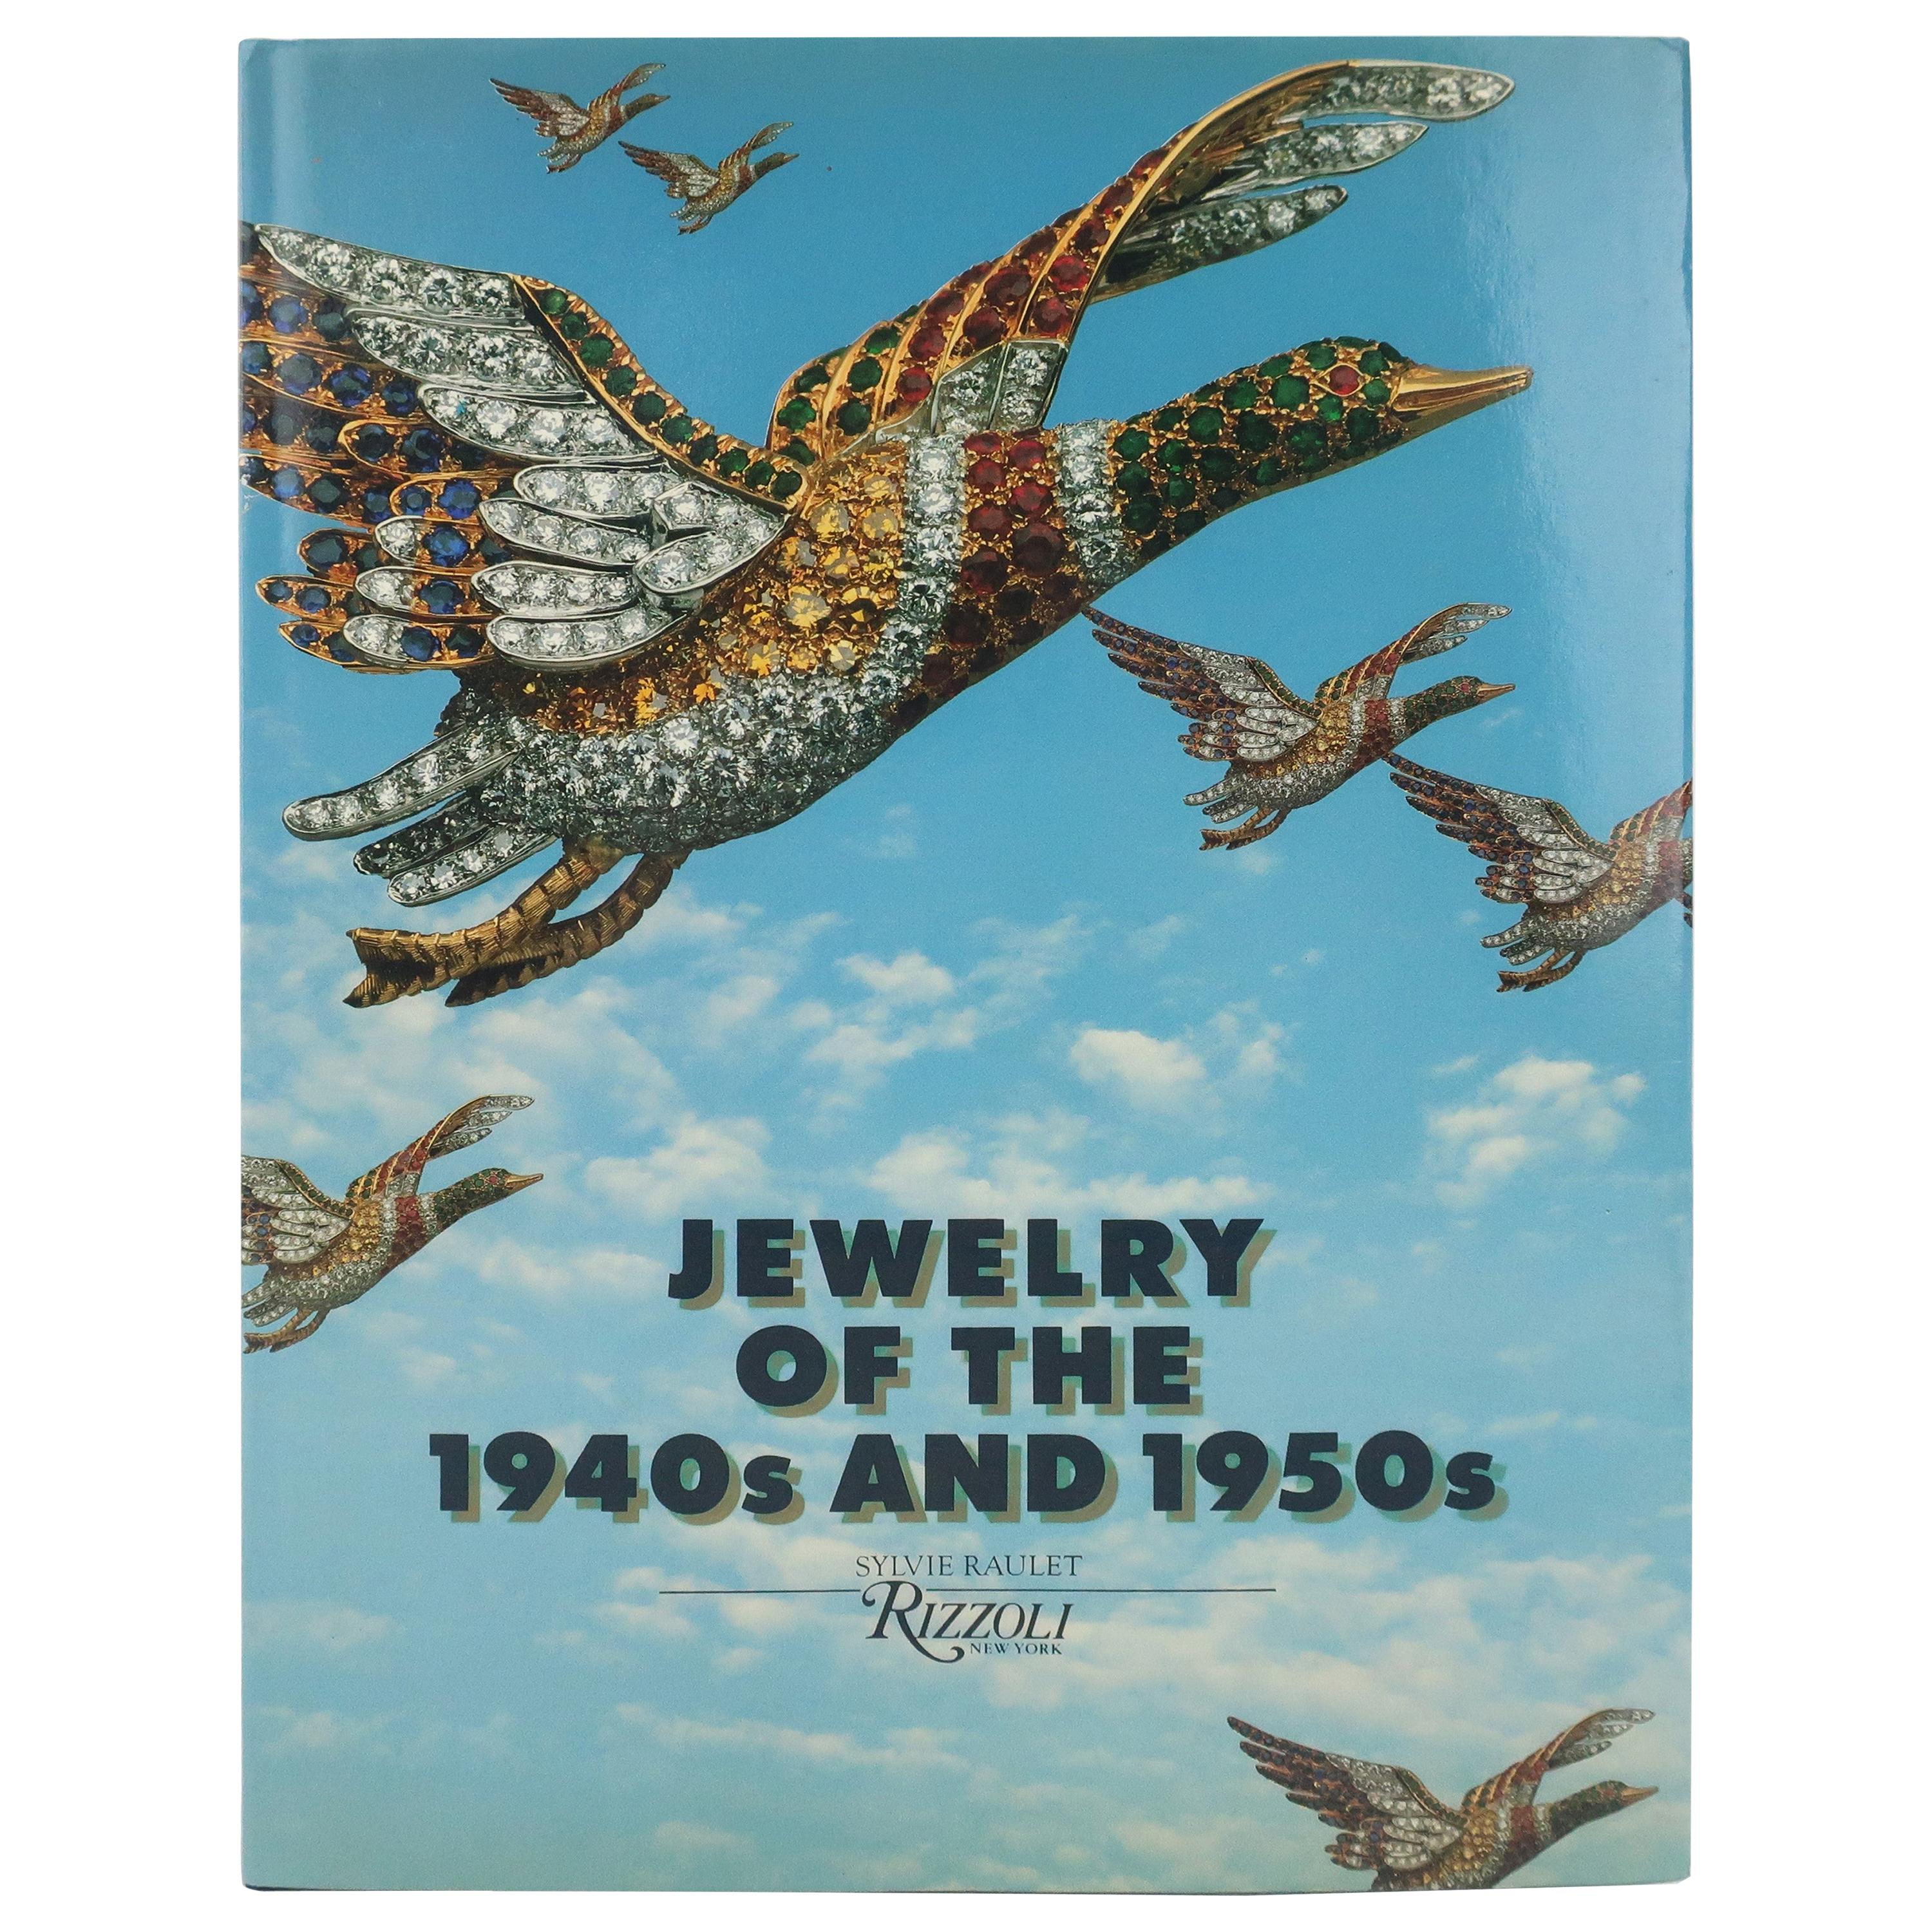 'Jewelry of the 1940s and 1950s' by Sylvie Raulet Collector's Coffee Table Book